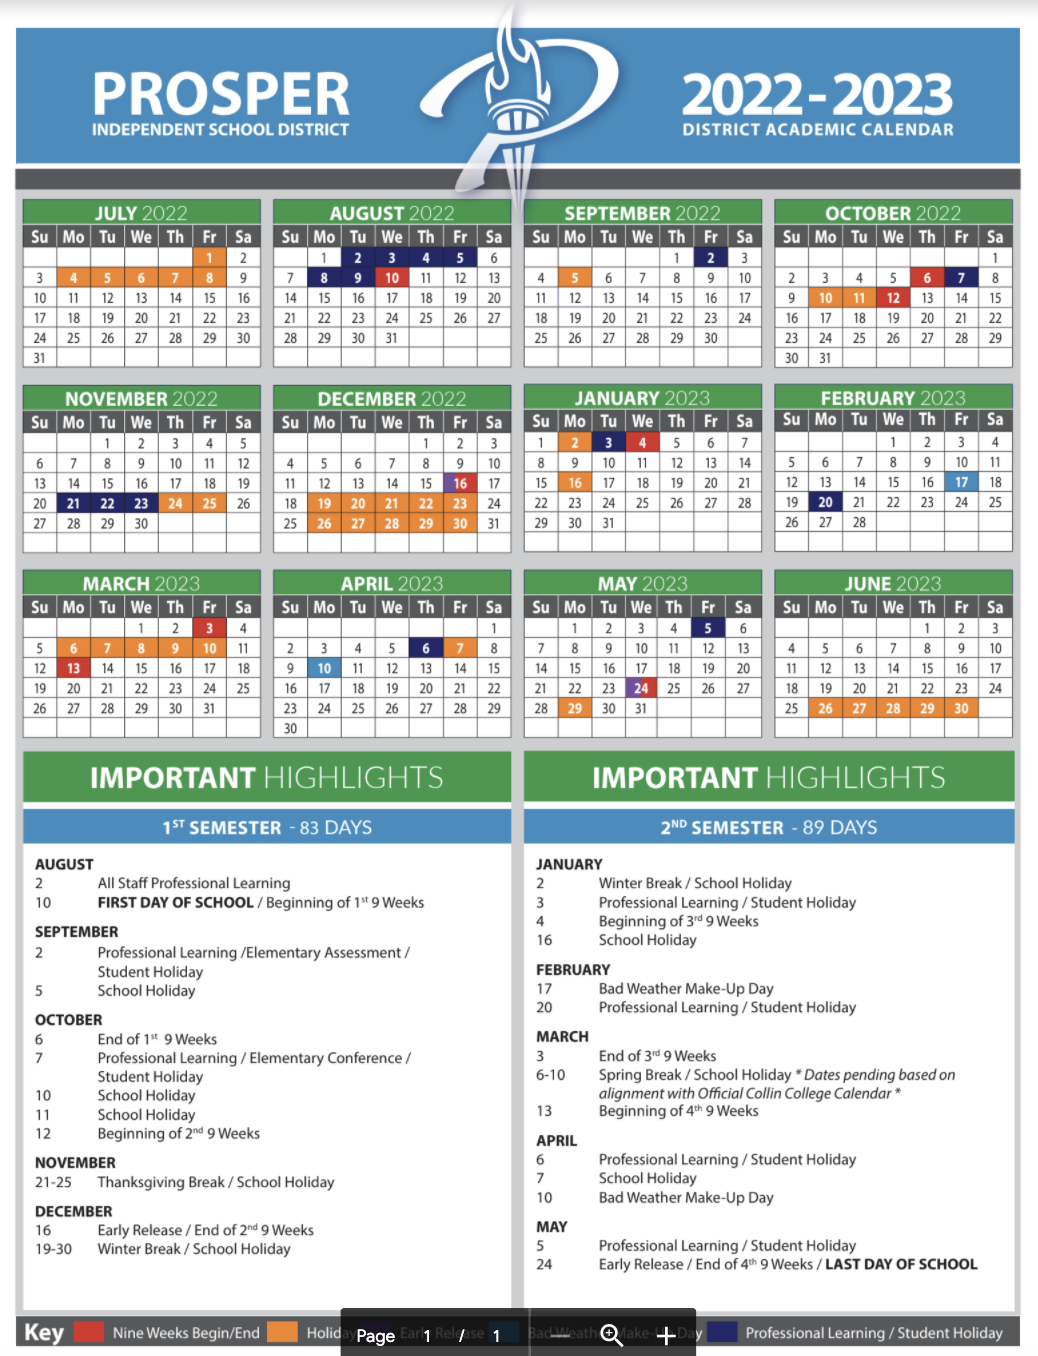 Plano Isd Calendar 2022 Here Are Prosper Isd's School Calendars For The 2022-2023 And The 2023-2024  School Years | Cities | Checkoutdfw.com